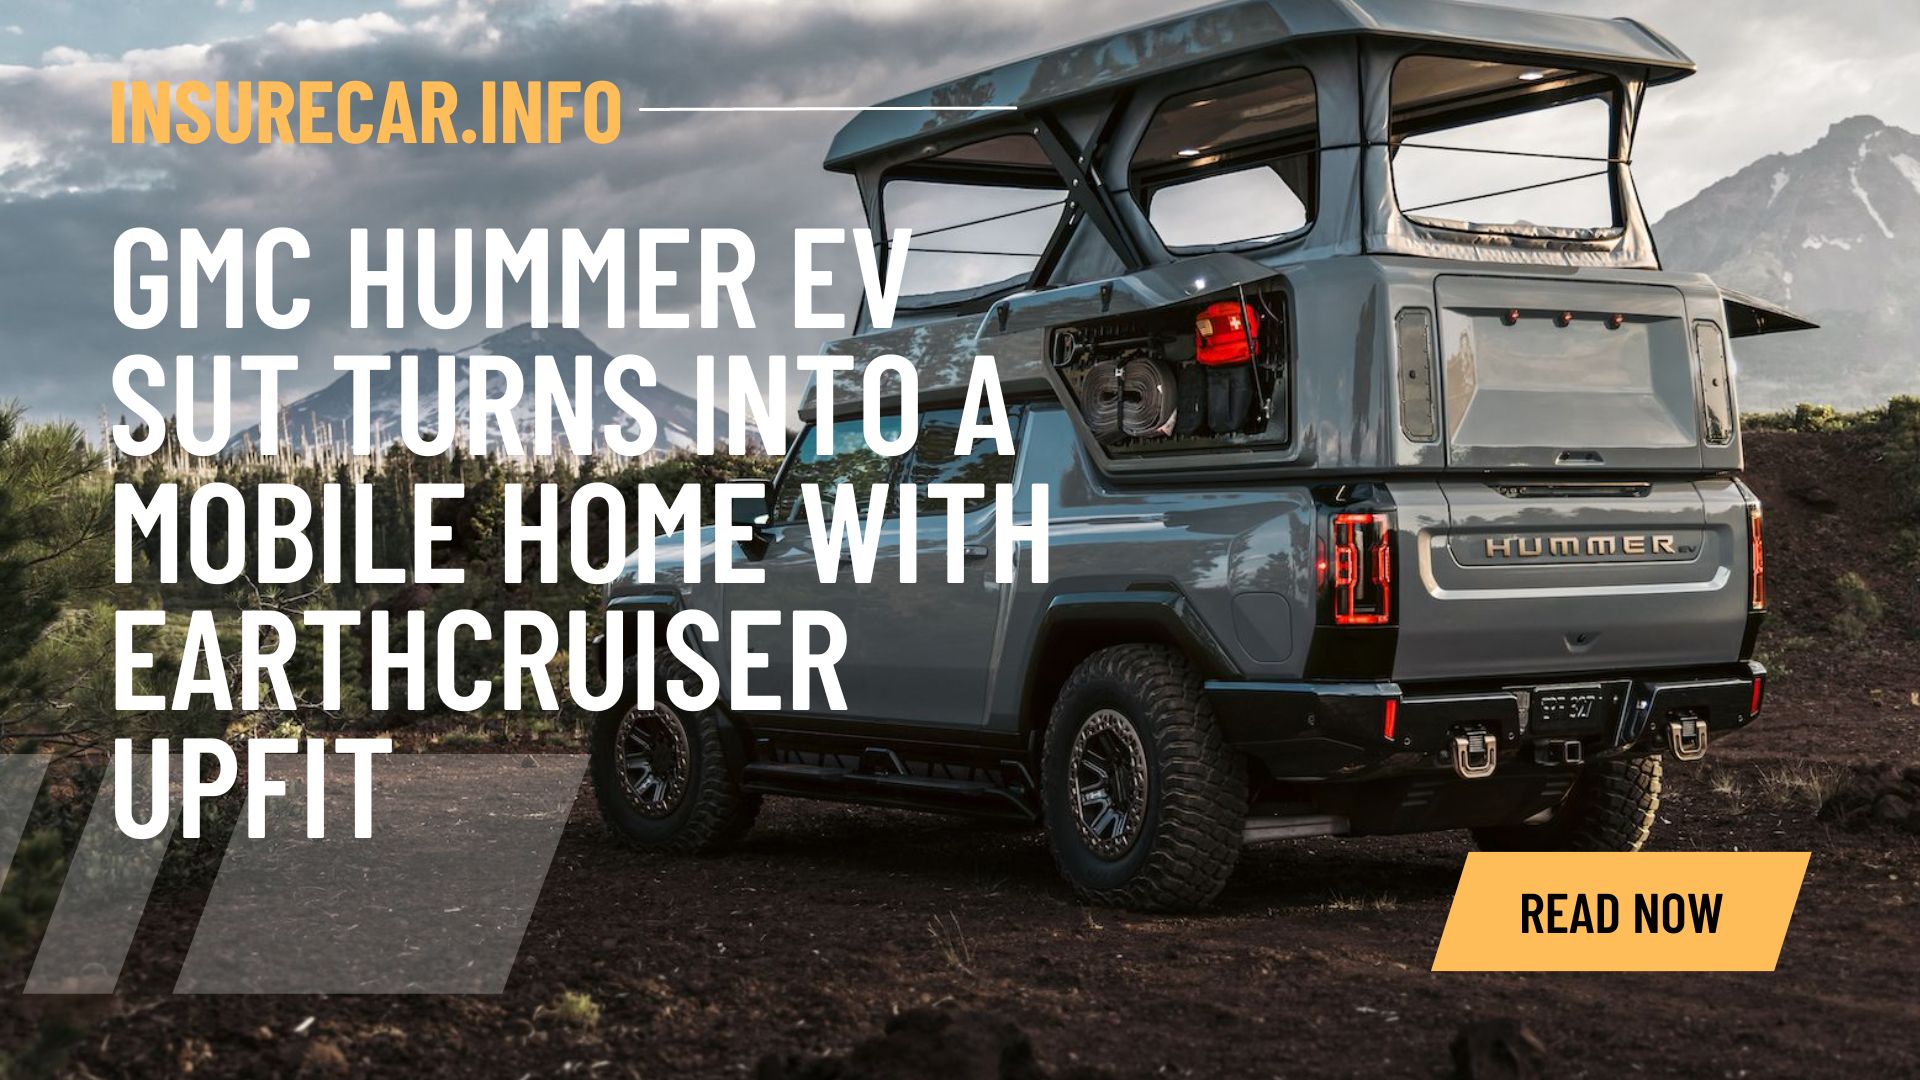 GMC Hummer EV SUT Turns into a Mobile Home with EarthCruiser Upfit